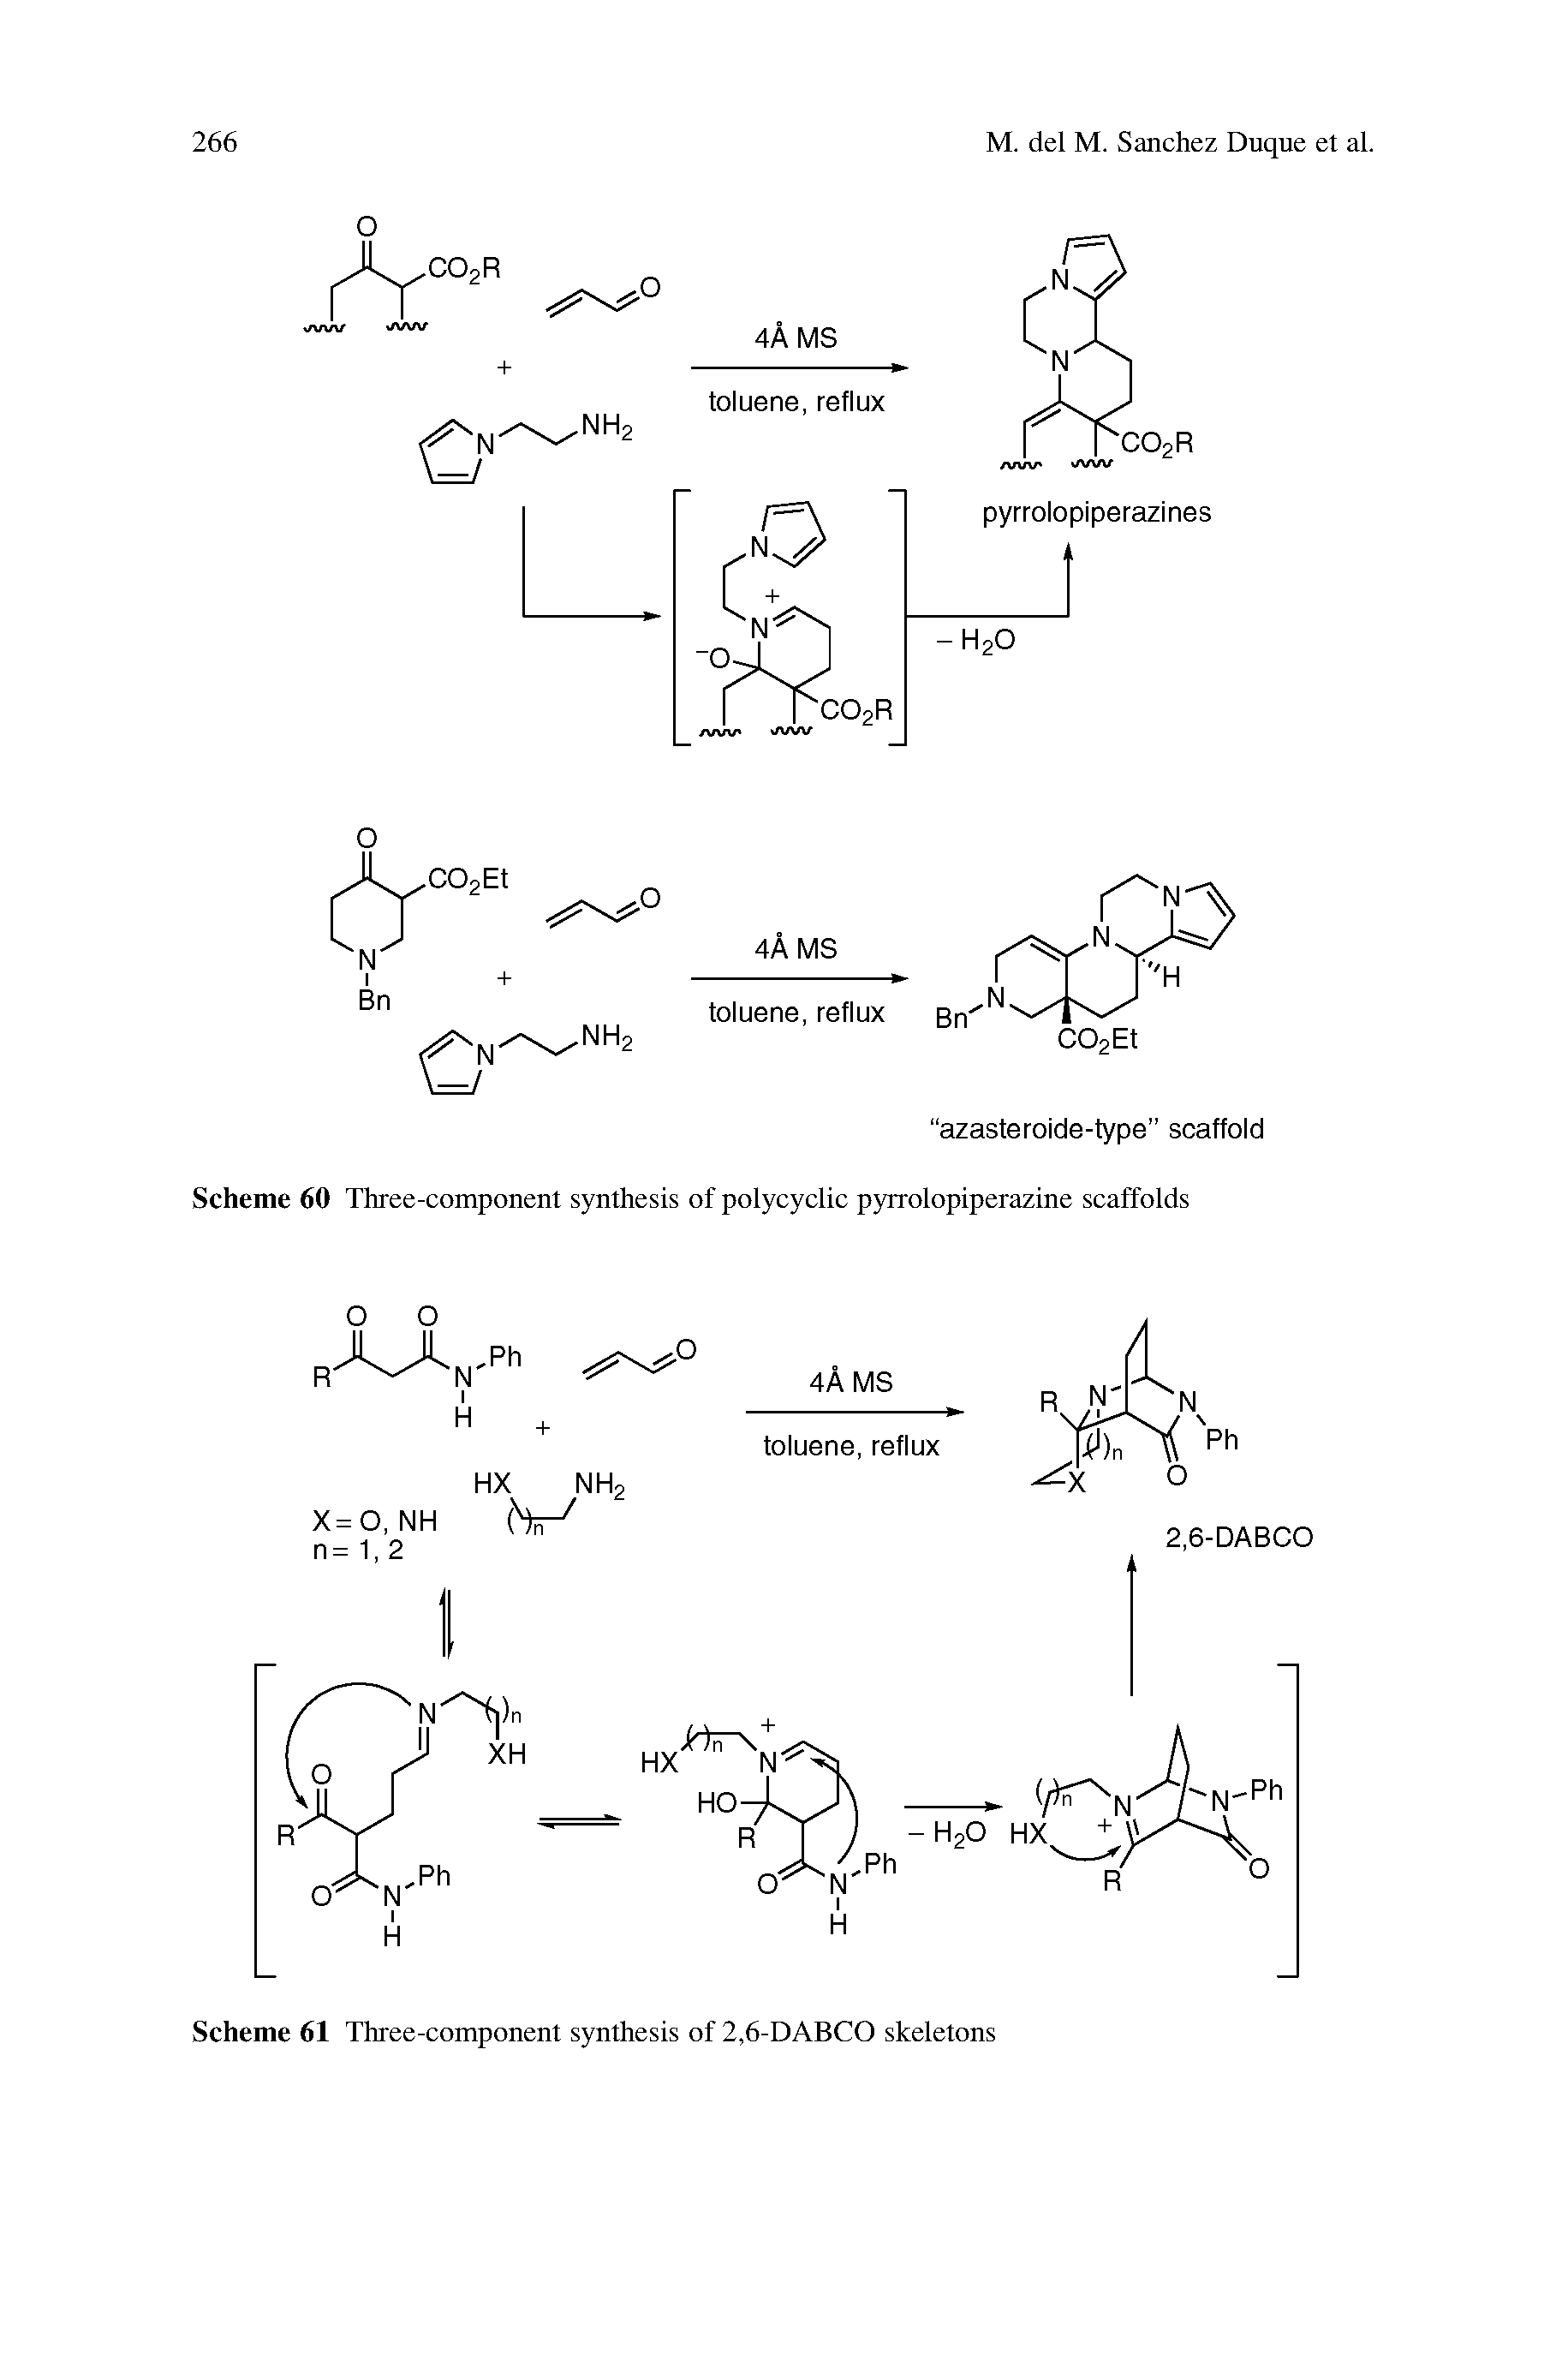 Scheme 61 Three-component synthesis of 2,6-DABCO skeletons...